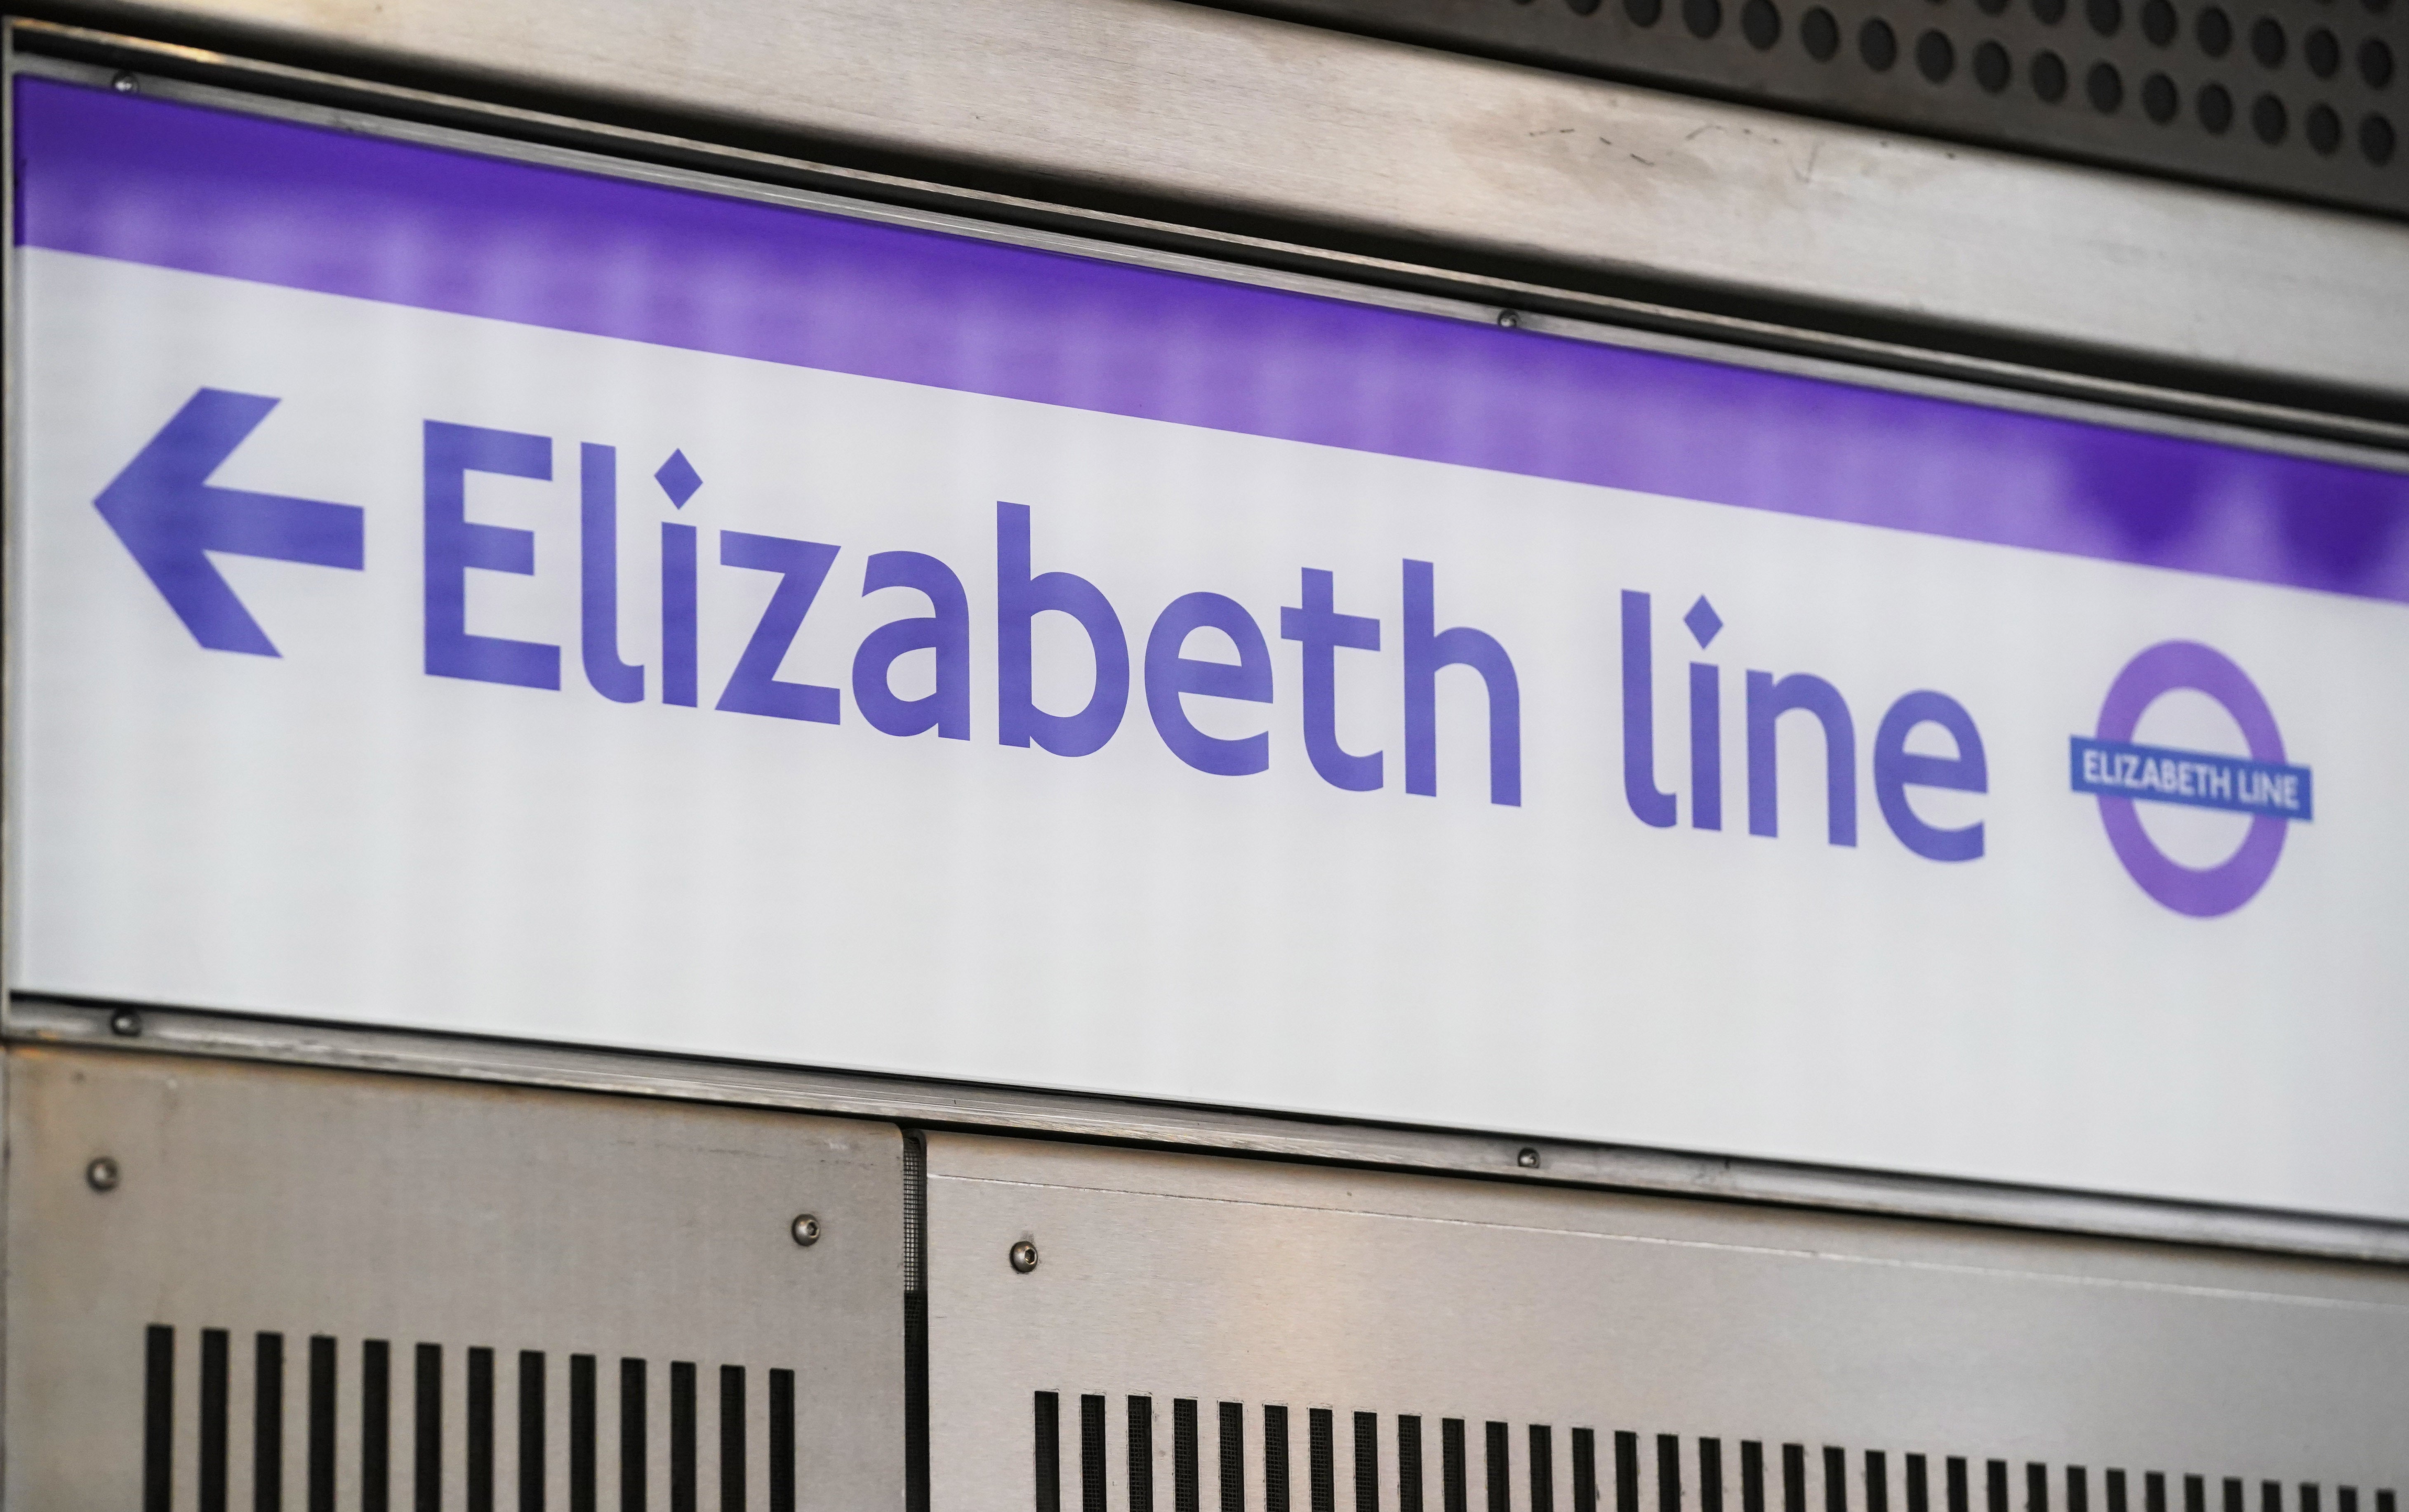 London’s Elizabeth line railway will open on Tuesday May 24, Transport for London has announced (Jonathan Brady/PA)